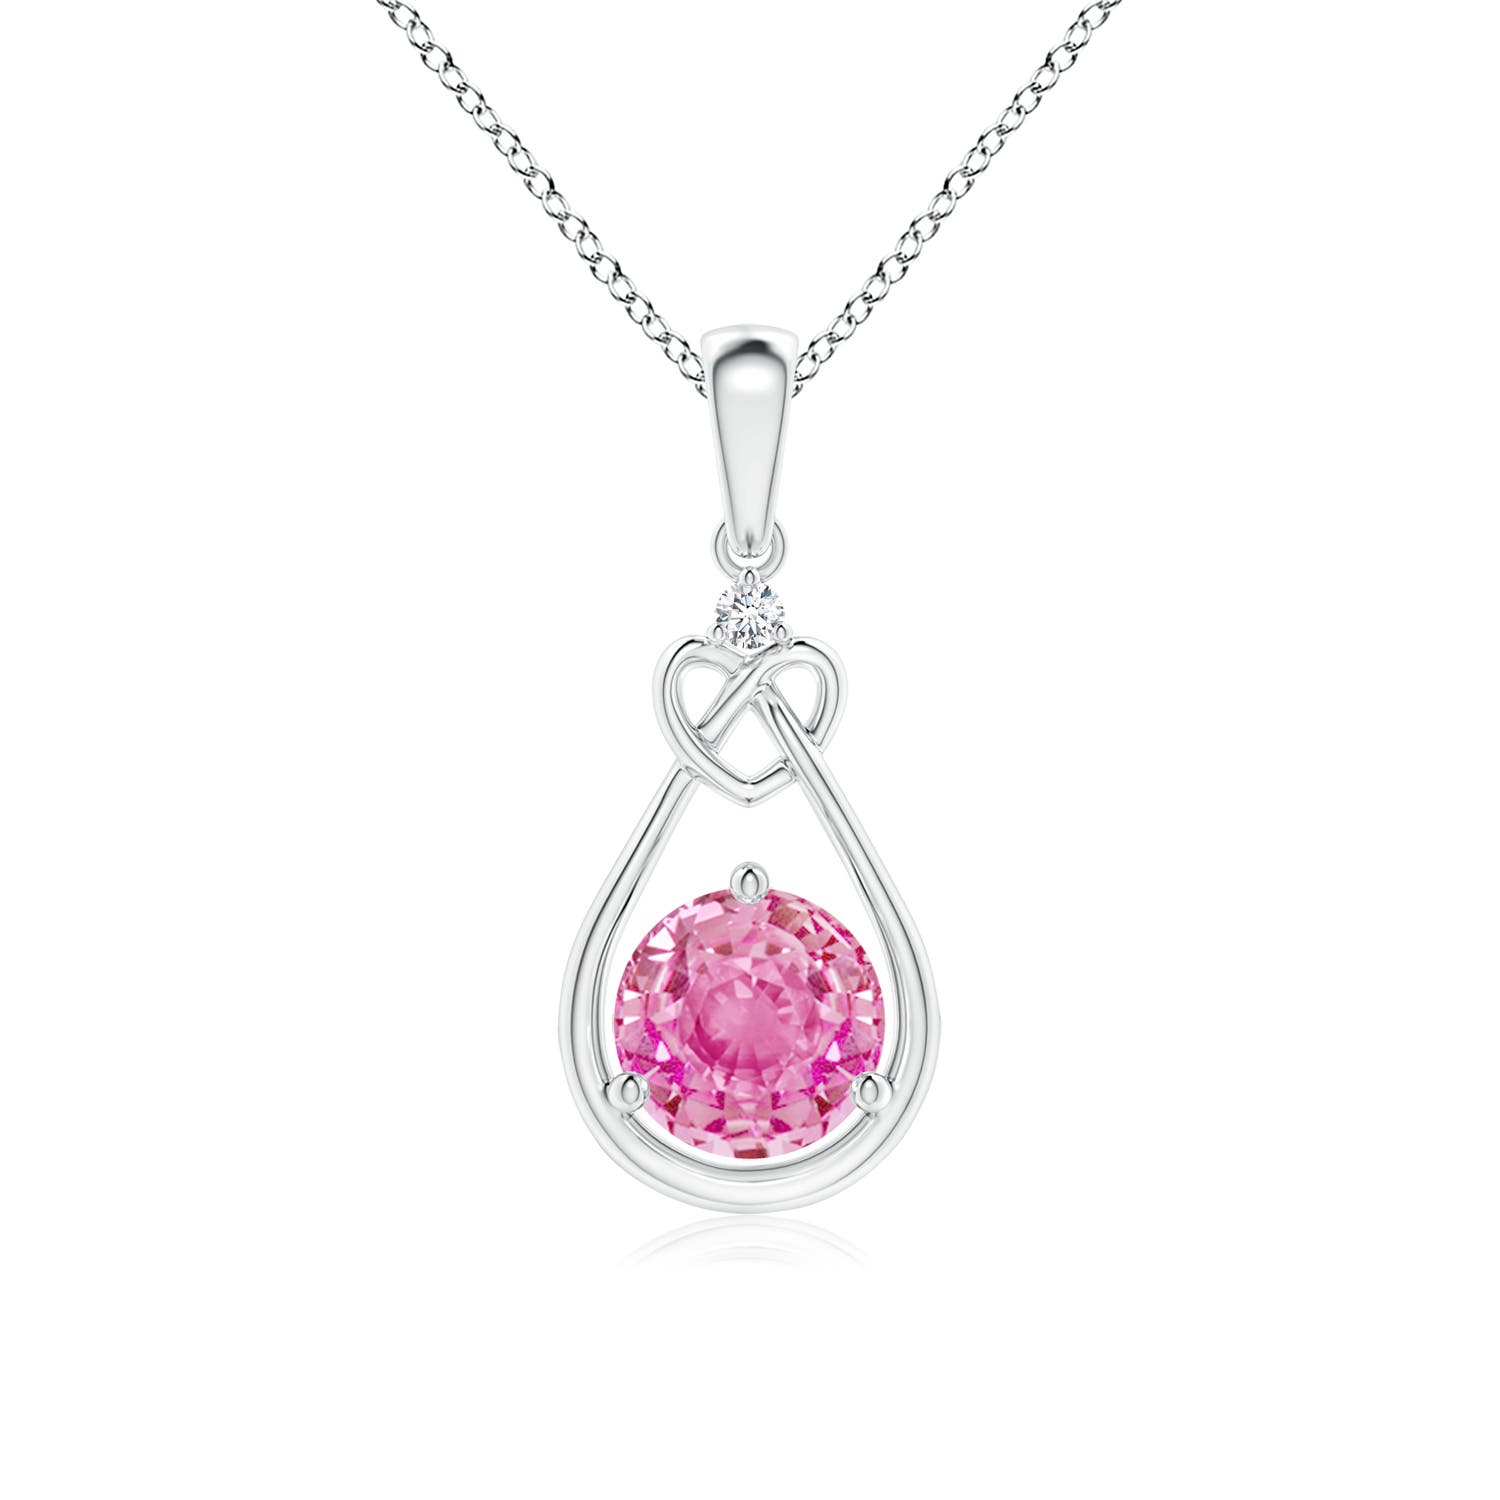 AA - Pink Sapphire / 1.01 CT / 14 KT White Gold